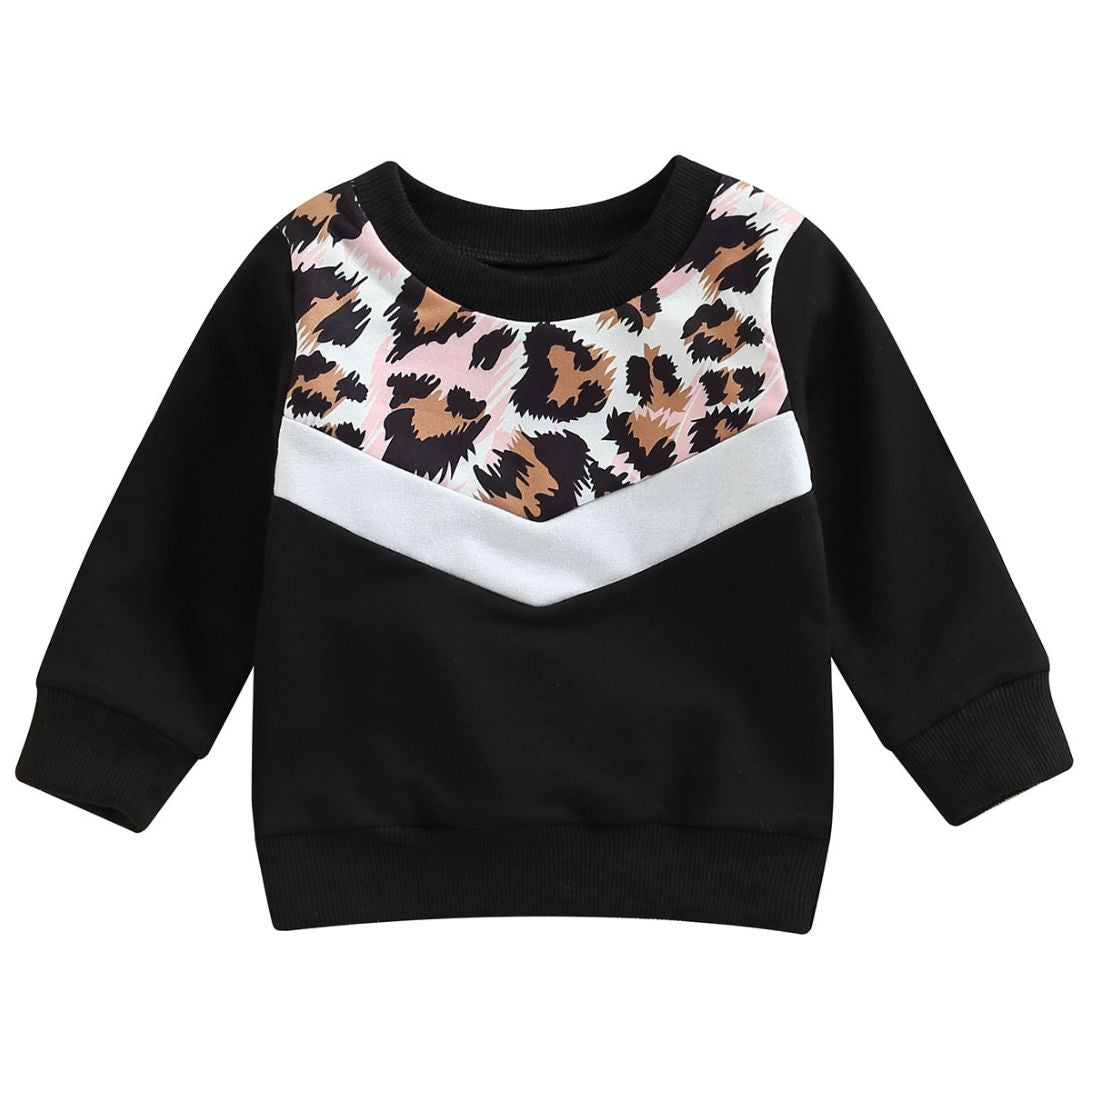 Baby Girl Black Leopard Sweatshirt - My Trendy Youngsters | Buy on-trend and stylish Baby and Toddler apparel @ My Trendy Youngsters - Dress your little one in Style @ My Trendy Youngsters 